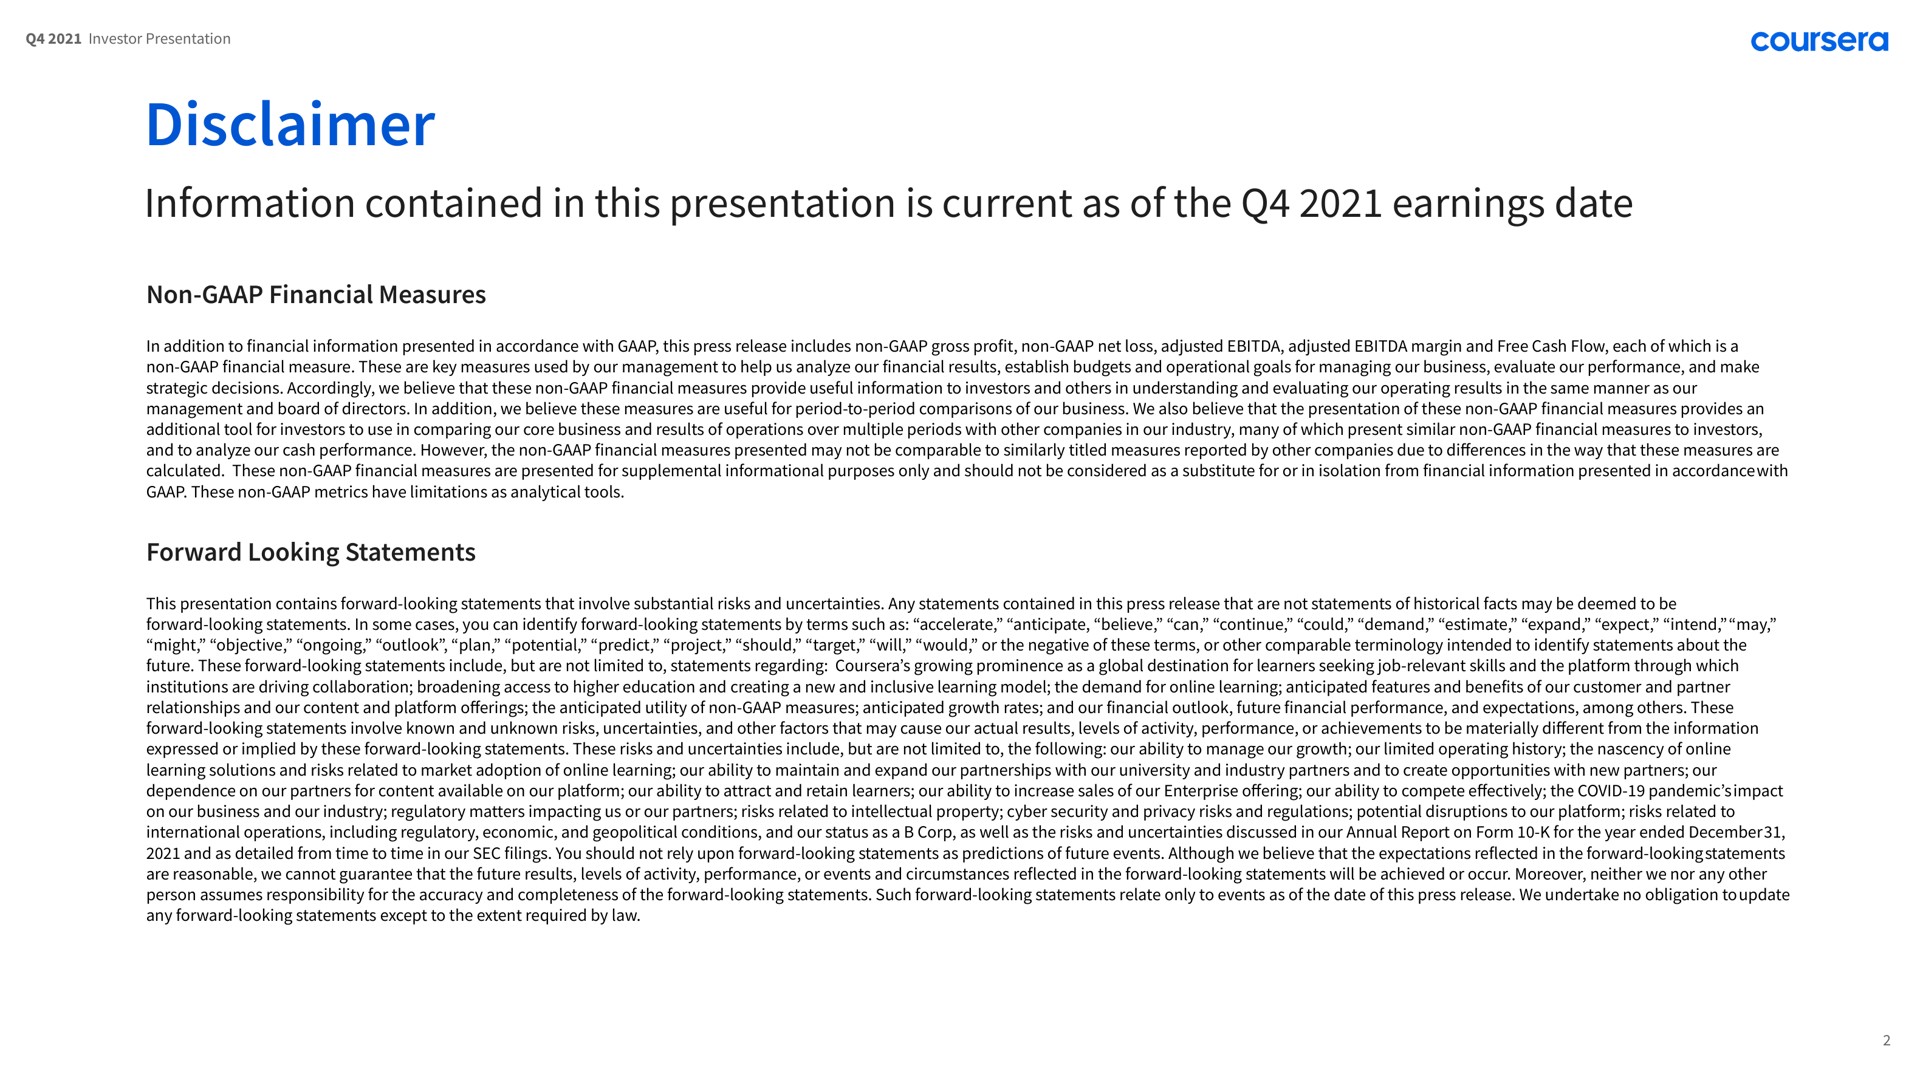 disclaimer information contained in this presentation is current as of the earnings date | Coursera